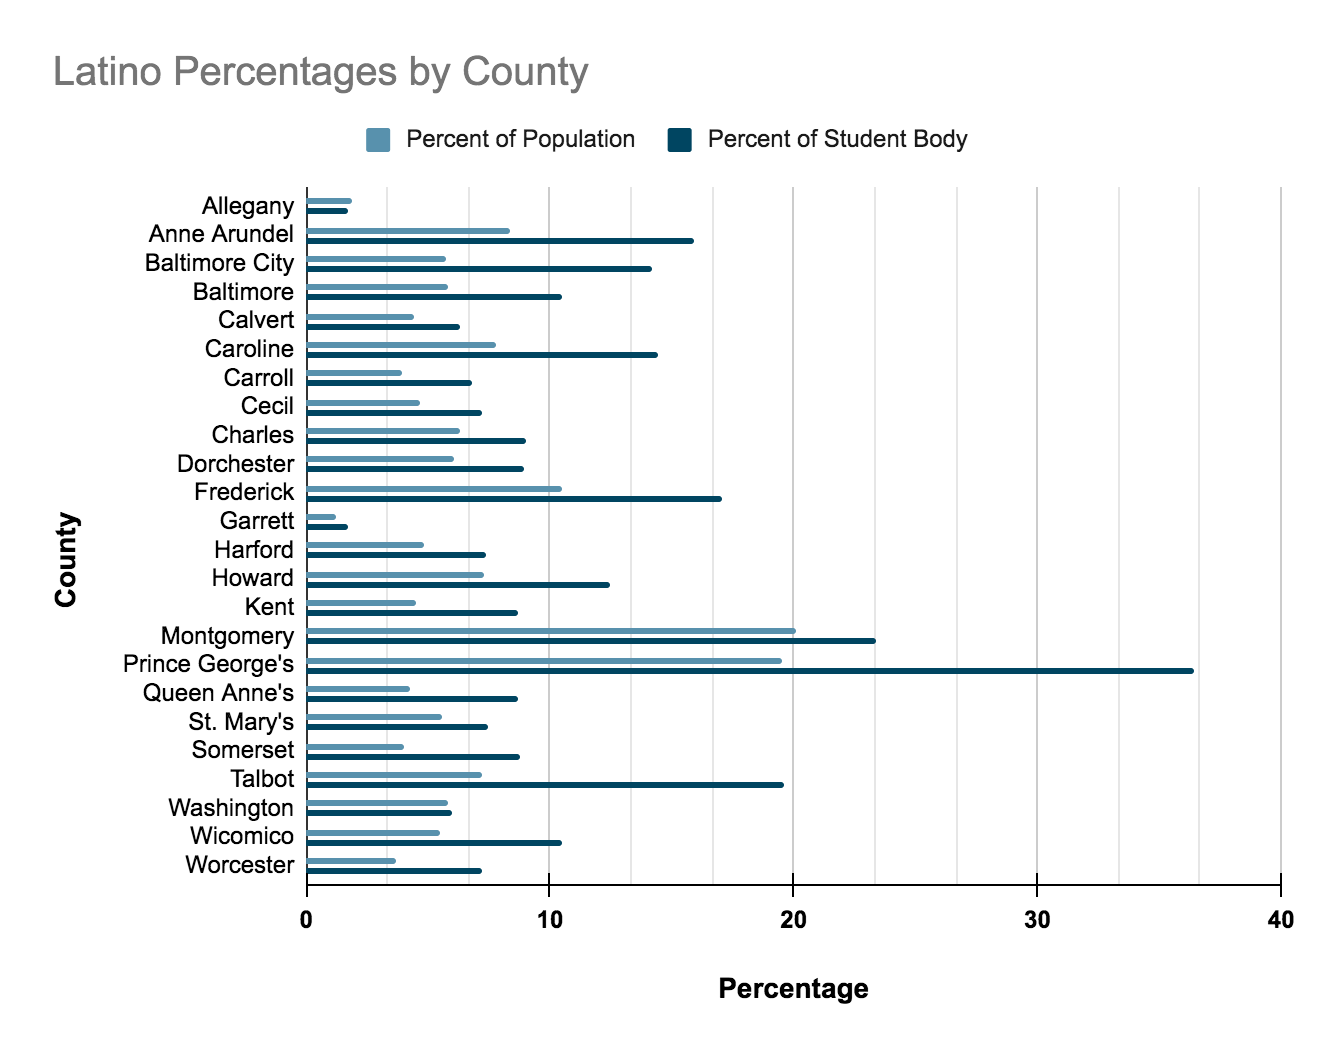 Graphic about Latino percentages by county